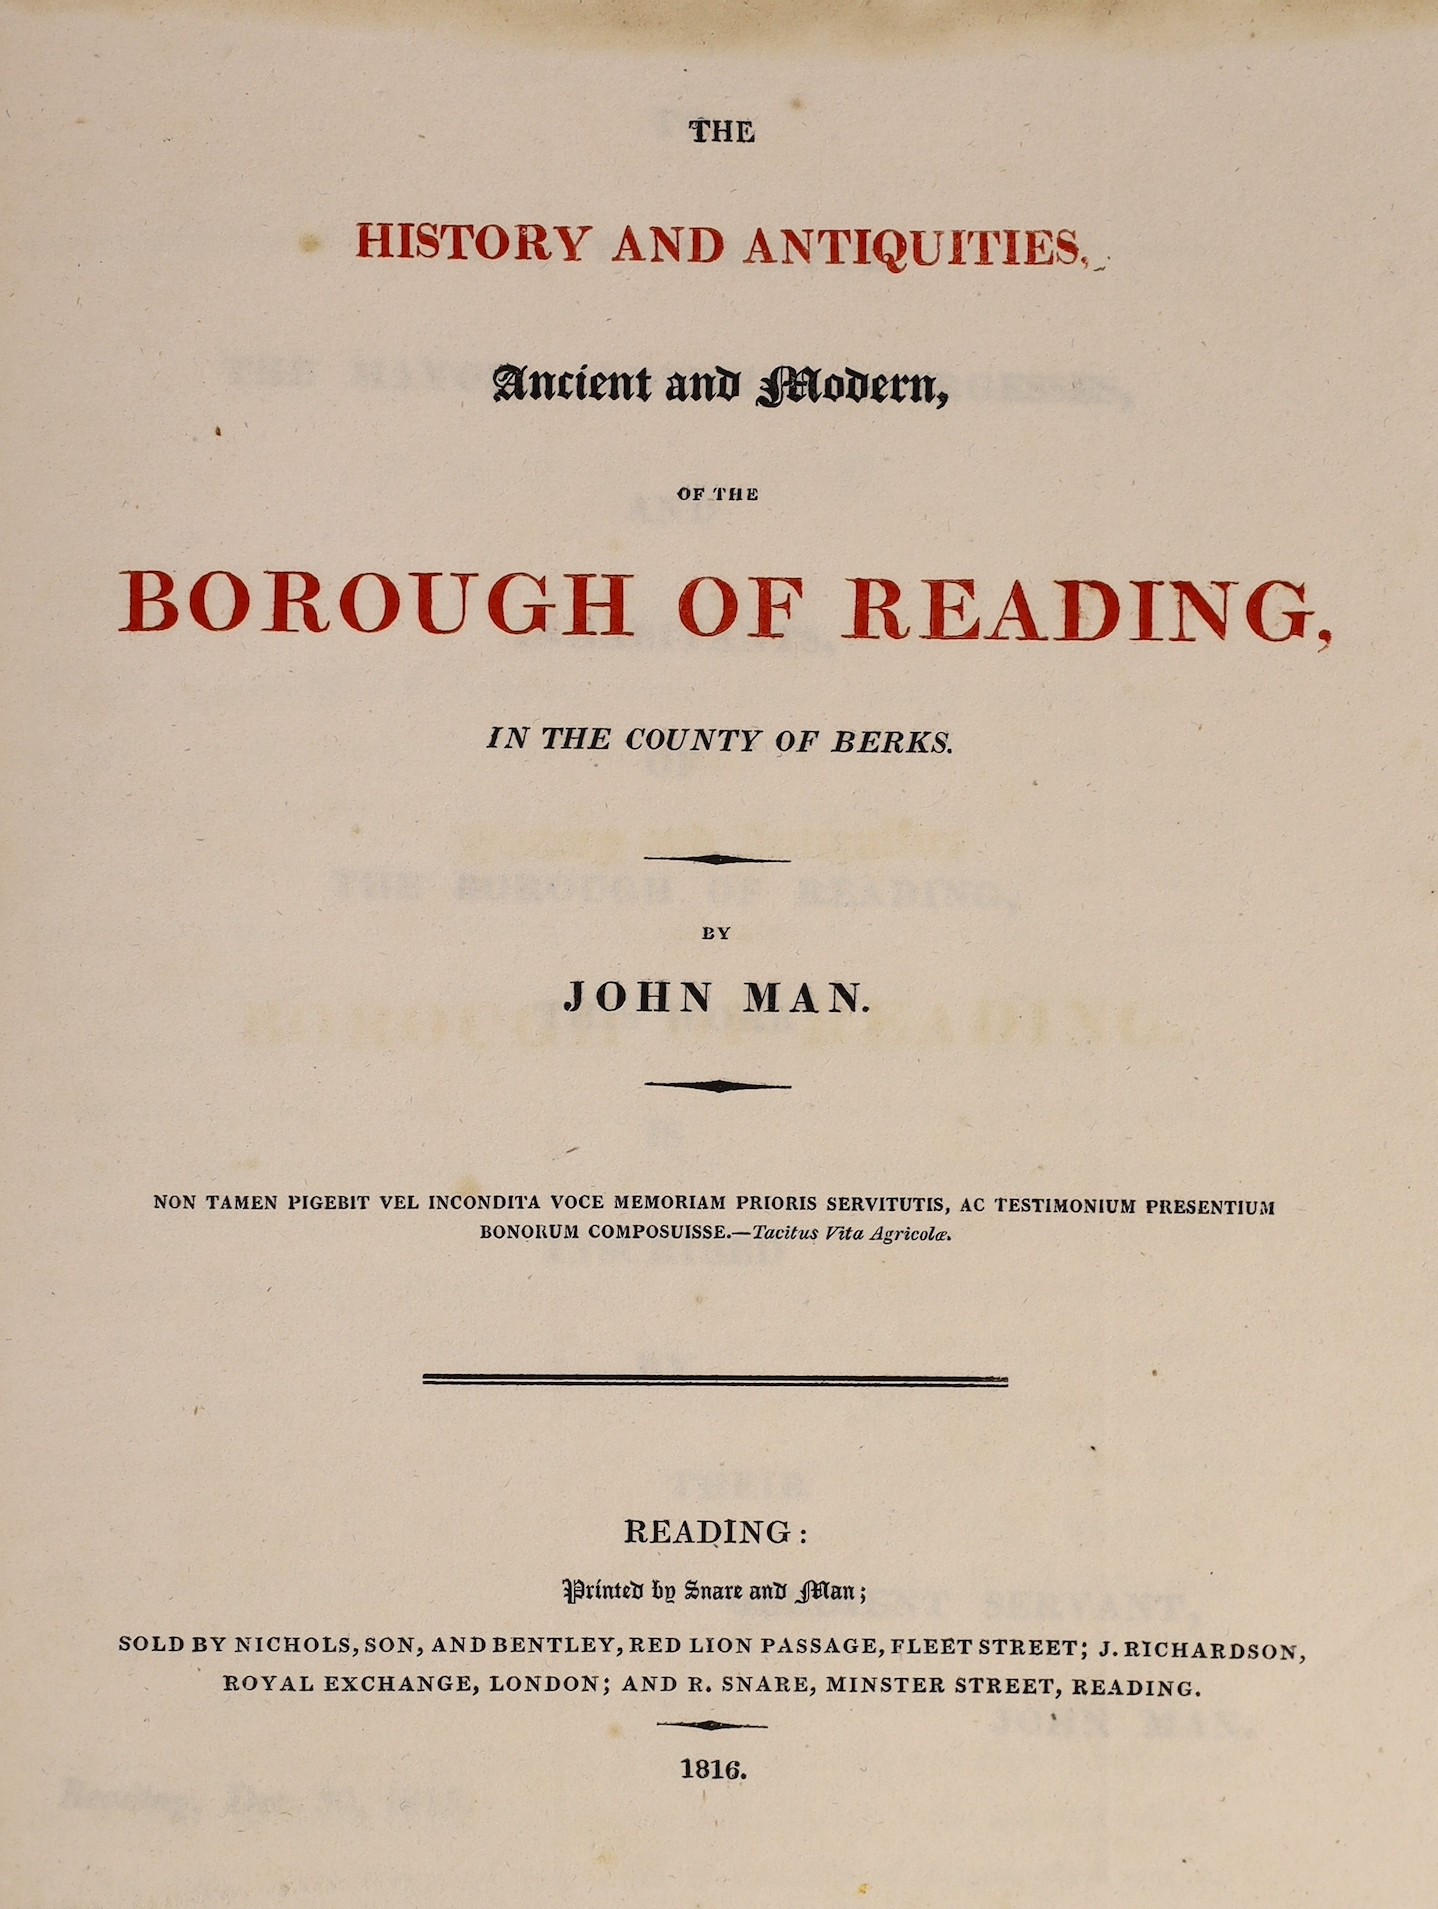 BERKSHIRE: Man, John - The History and Antiquities, Ancient and Modern, of the Borough of Reading ... 21 plates and plans (2 folded) and a folded facsimile, text engravings, half title, errata slip at end; old reversed c